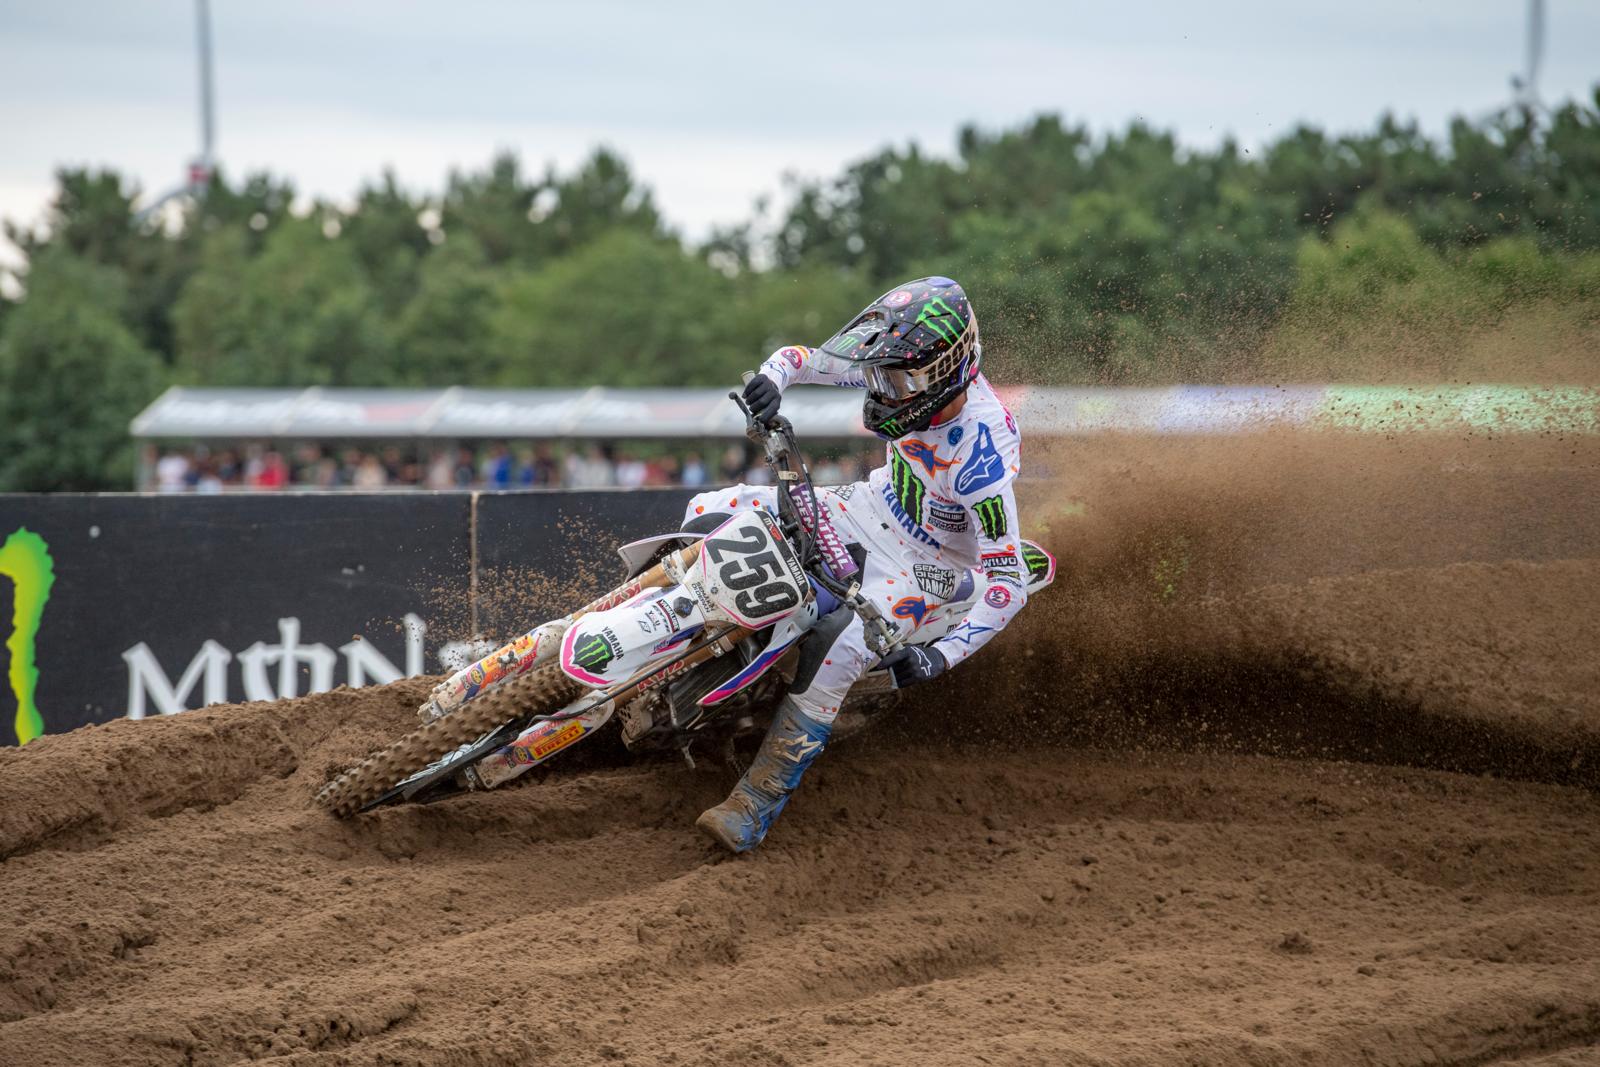 Coldenhoff Collects Fourth Podium Finish at MXGP Flanders as Seewer Finishes Fourth